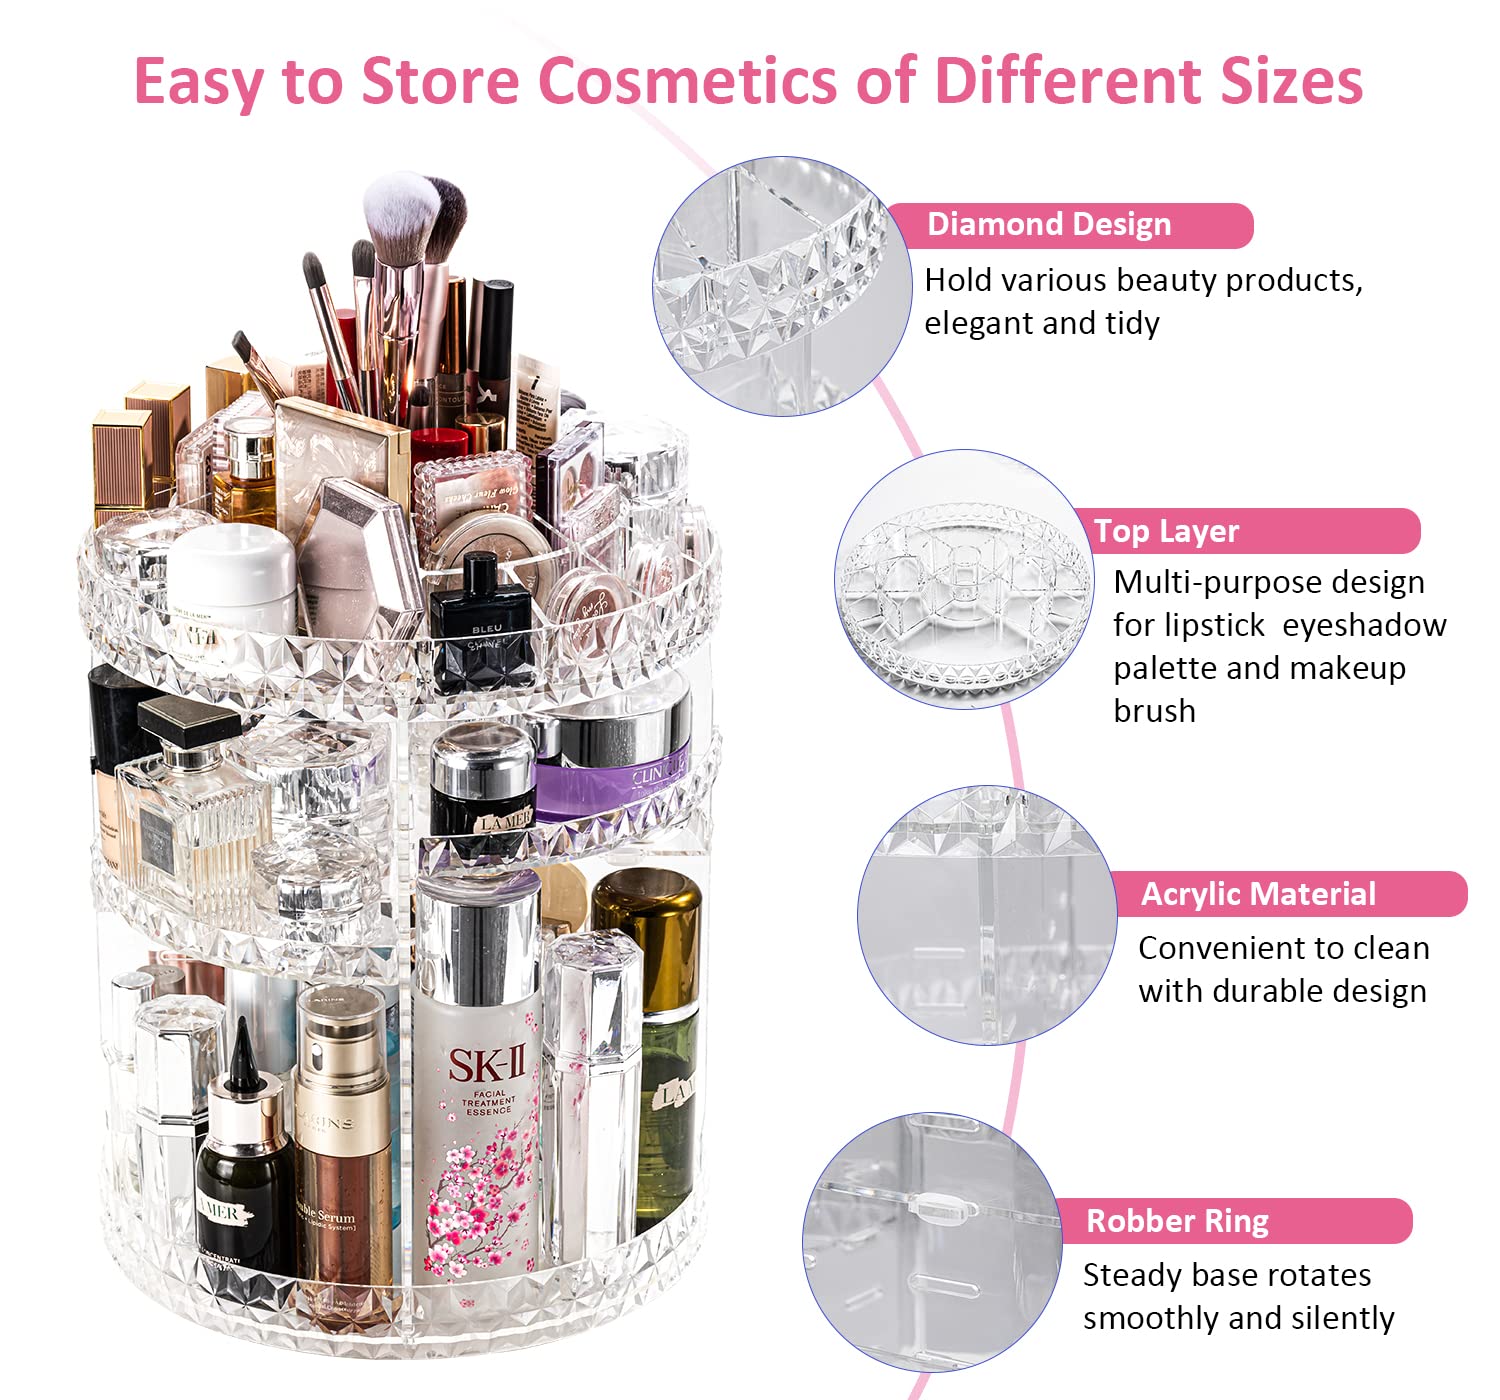 DreamGenius Makeup Organizer, 360 Degree Rotating Perfume Organizer, Adjustable Makeup organizers and storage with 8 Layers , Fits Makeup Brushes Lipsticks and Jewelry, Clear Acrylic